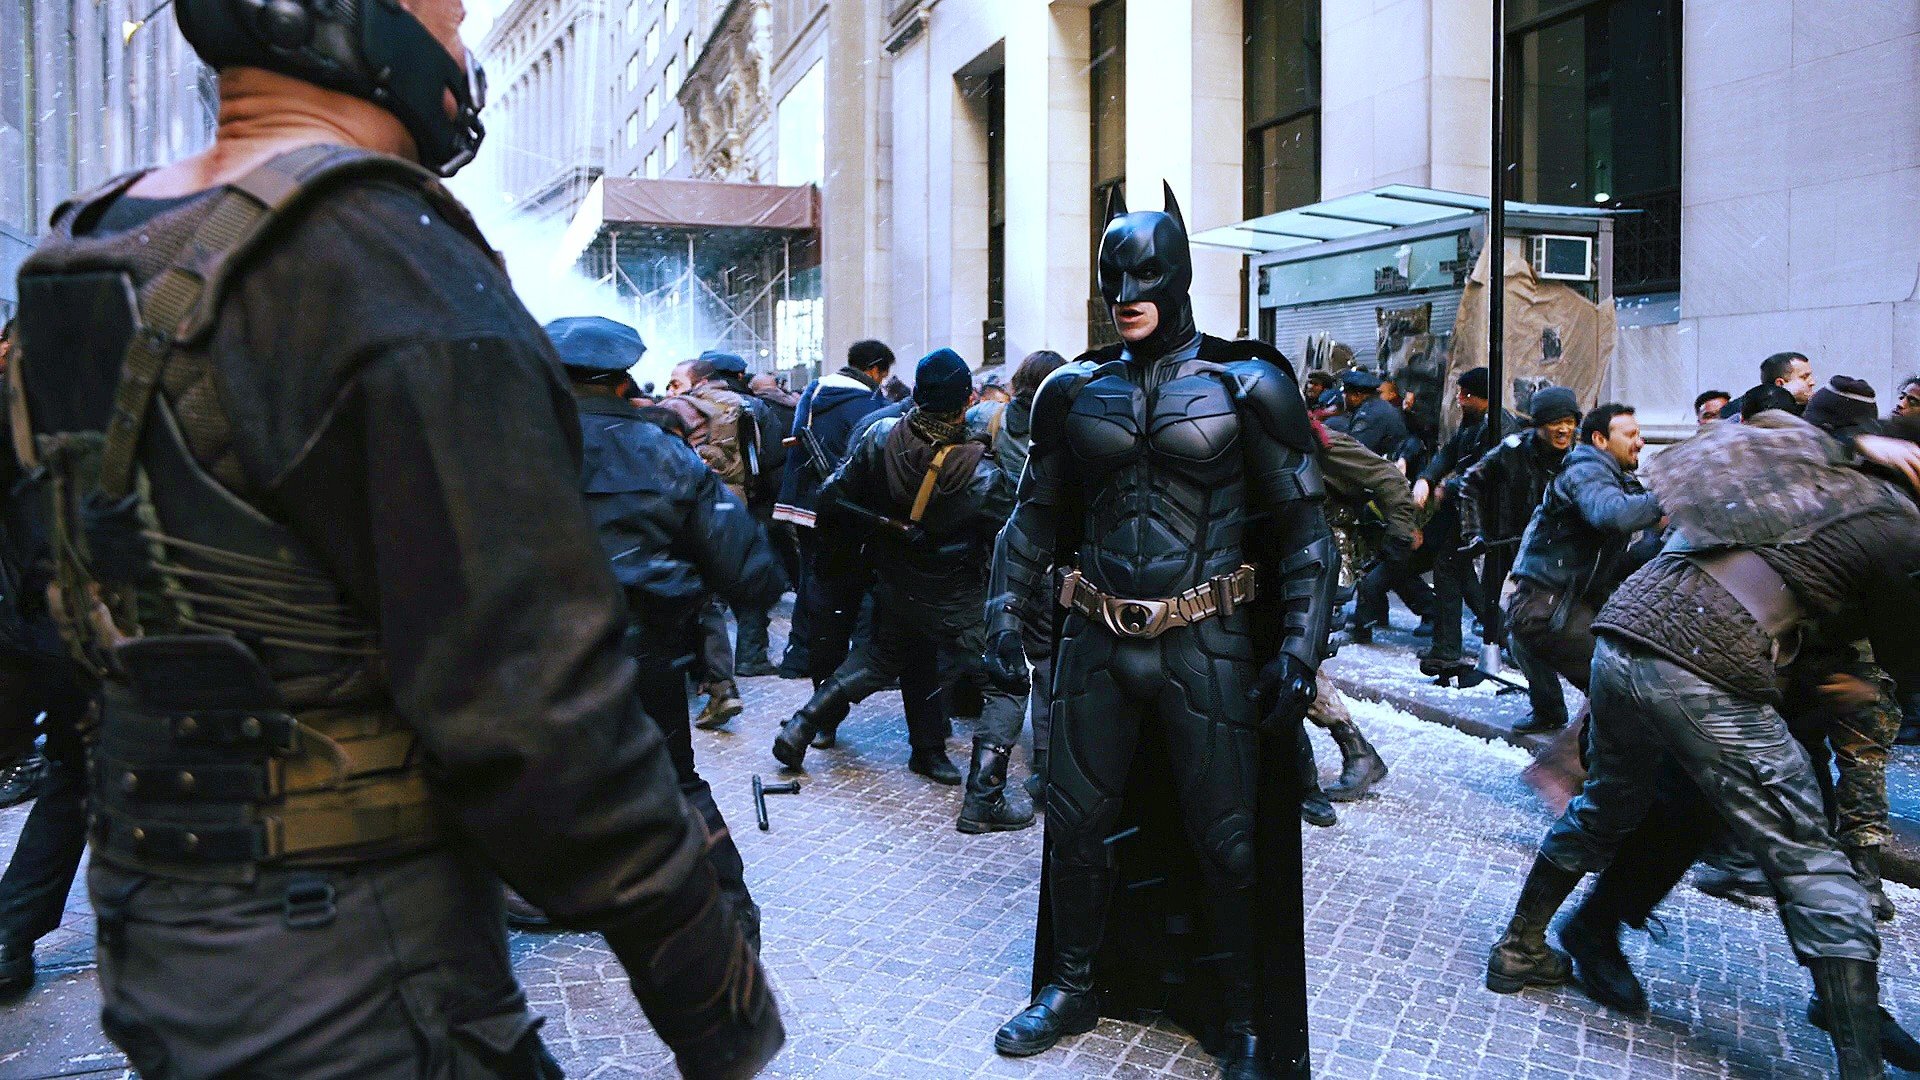 Free Download The Dark Knight Rises Wallpaper Id - Batman The Dark Knight Rises Fight , HD Wallpaper & Backgrounds